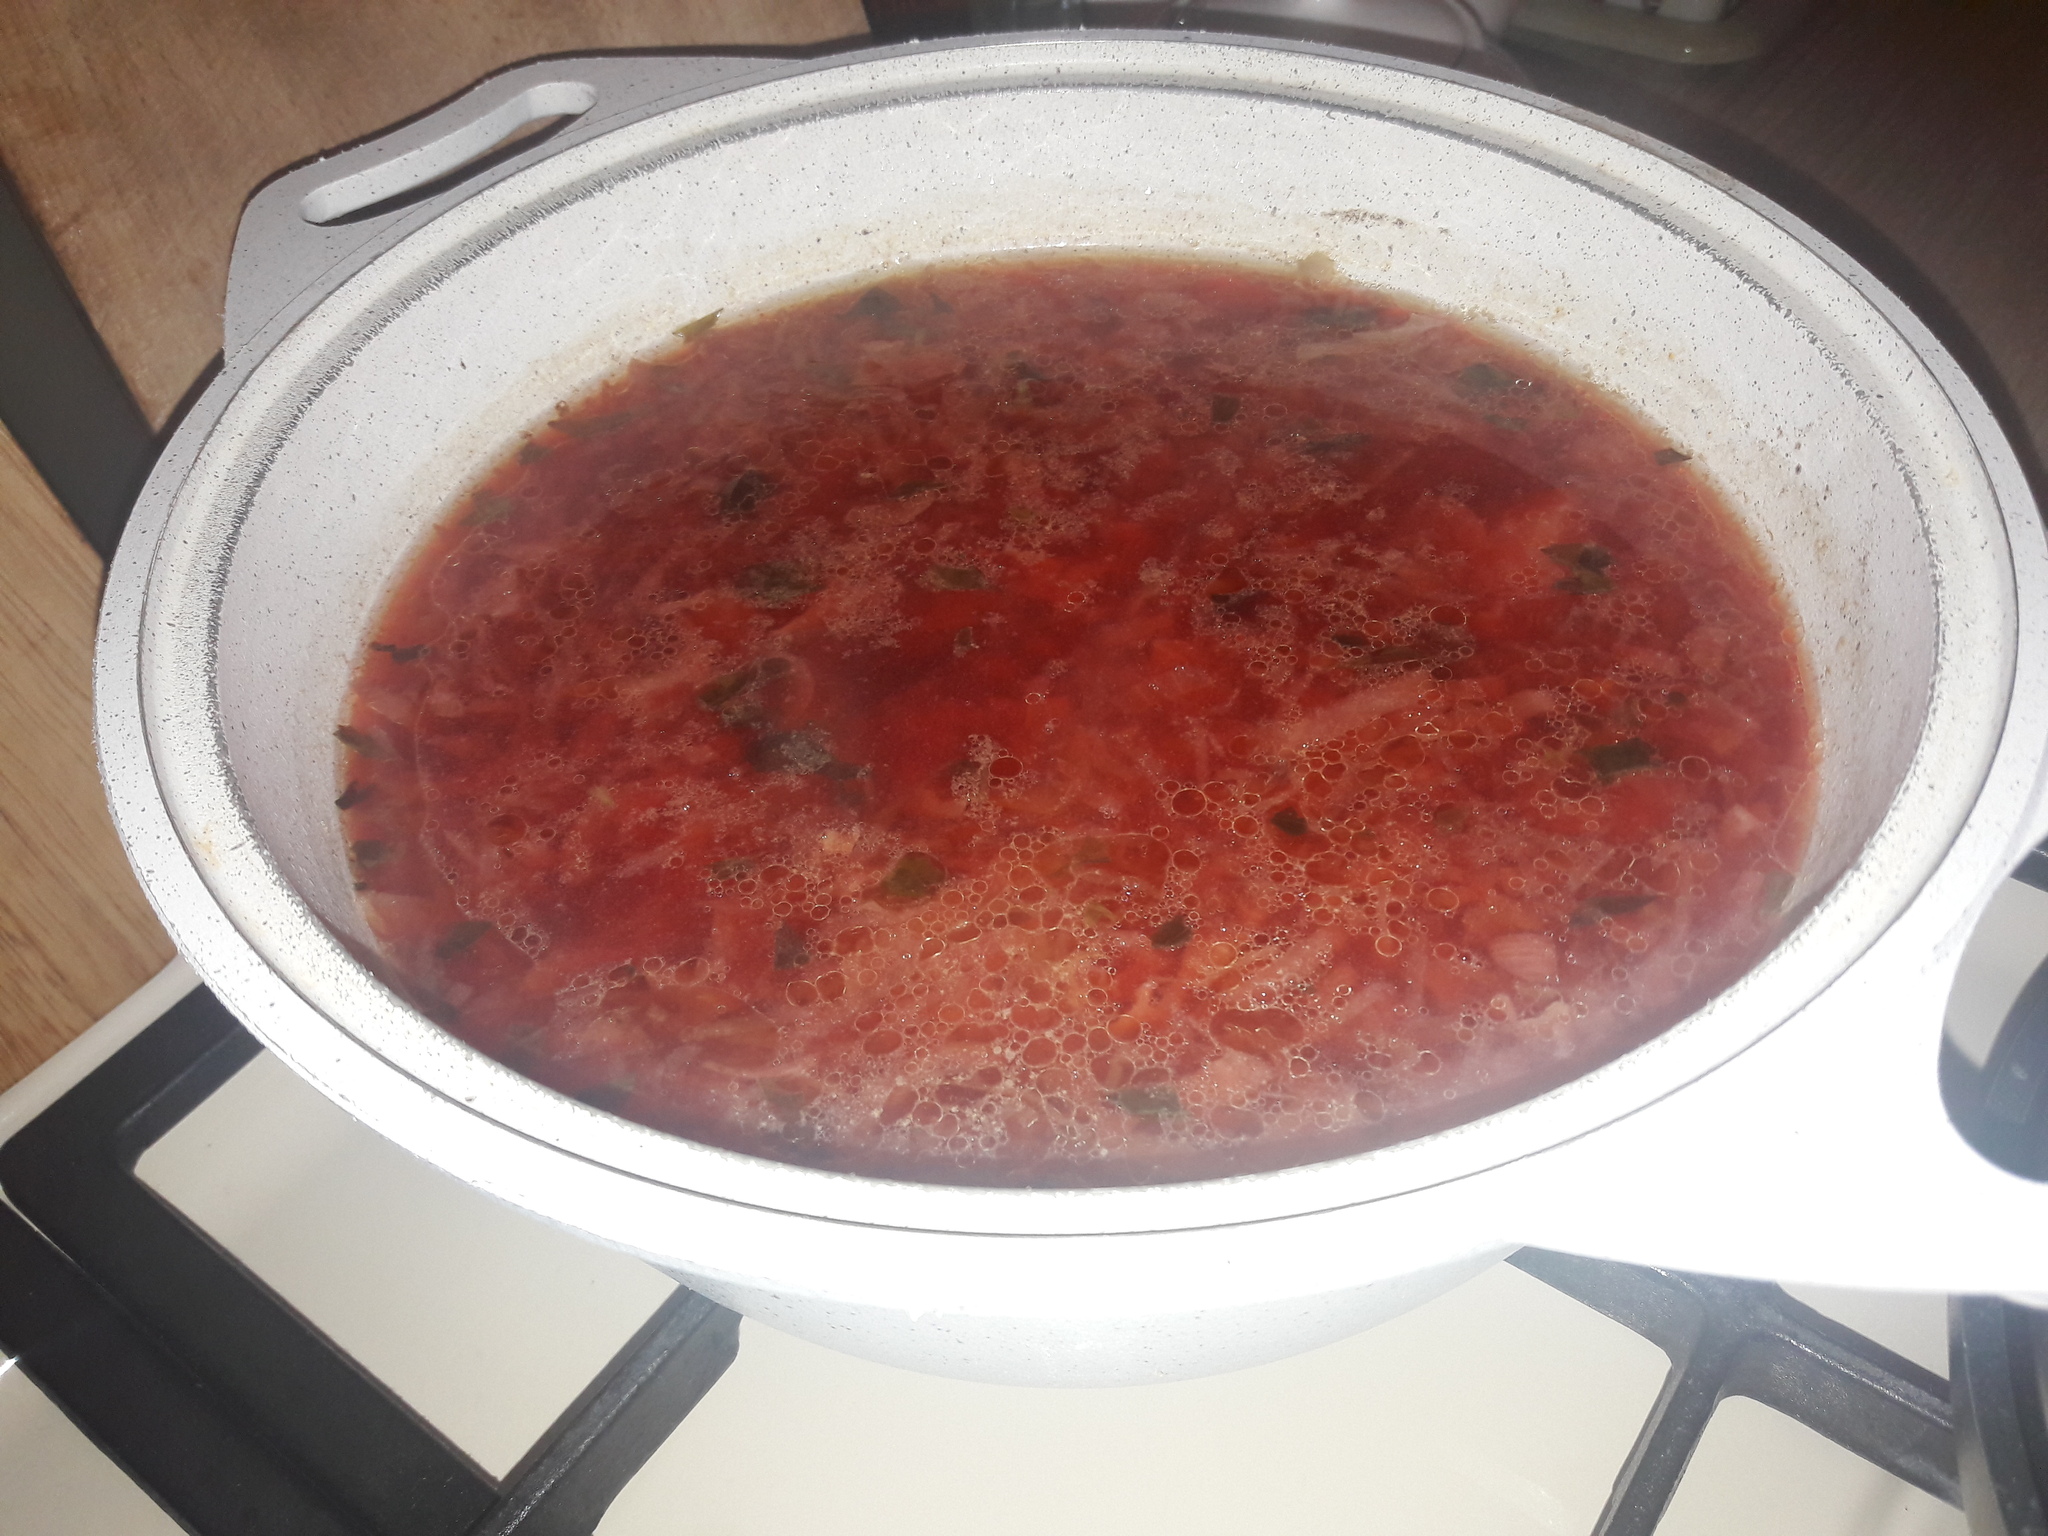 An evening can be better when there is delicious food. - My, Food, Borsch, Casserole, Mood